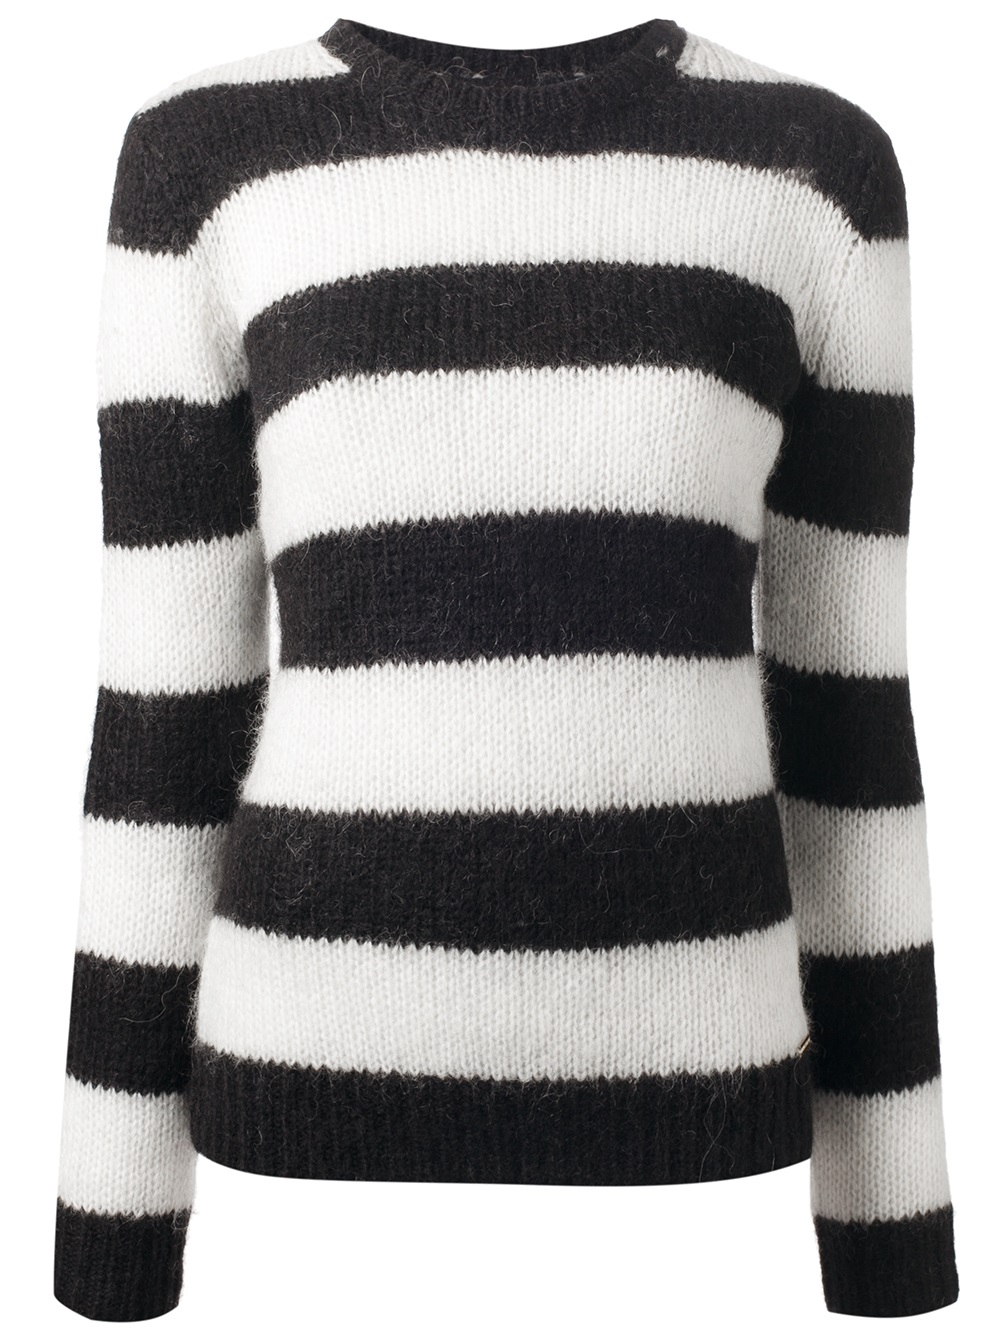 Lyst - Michael Michael Kors Michael Michael Kors Striped Sweater in White